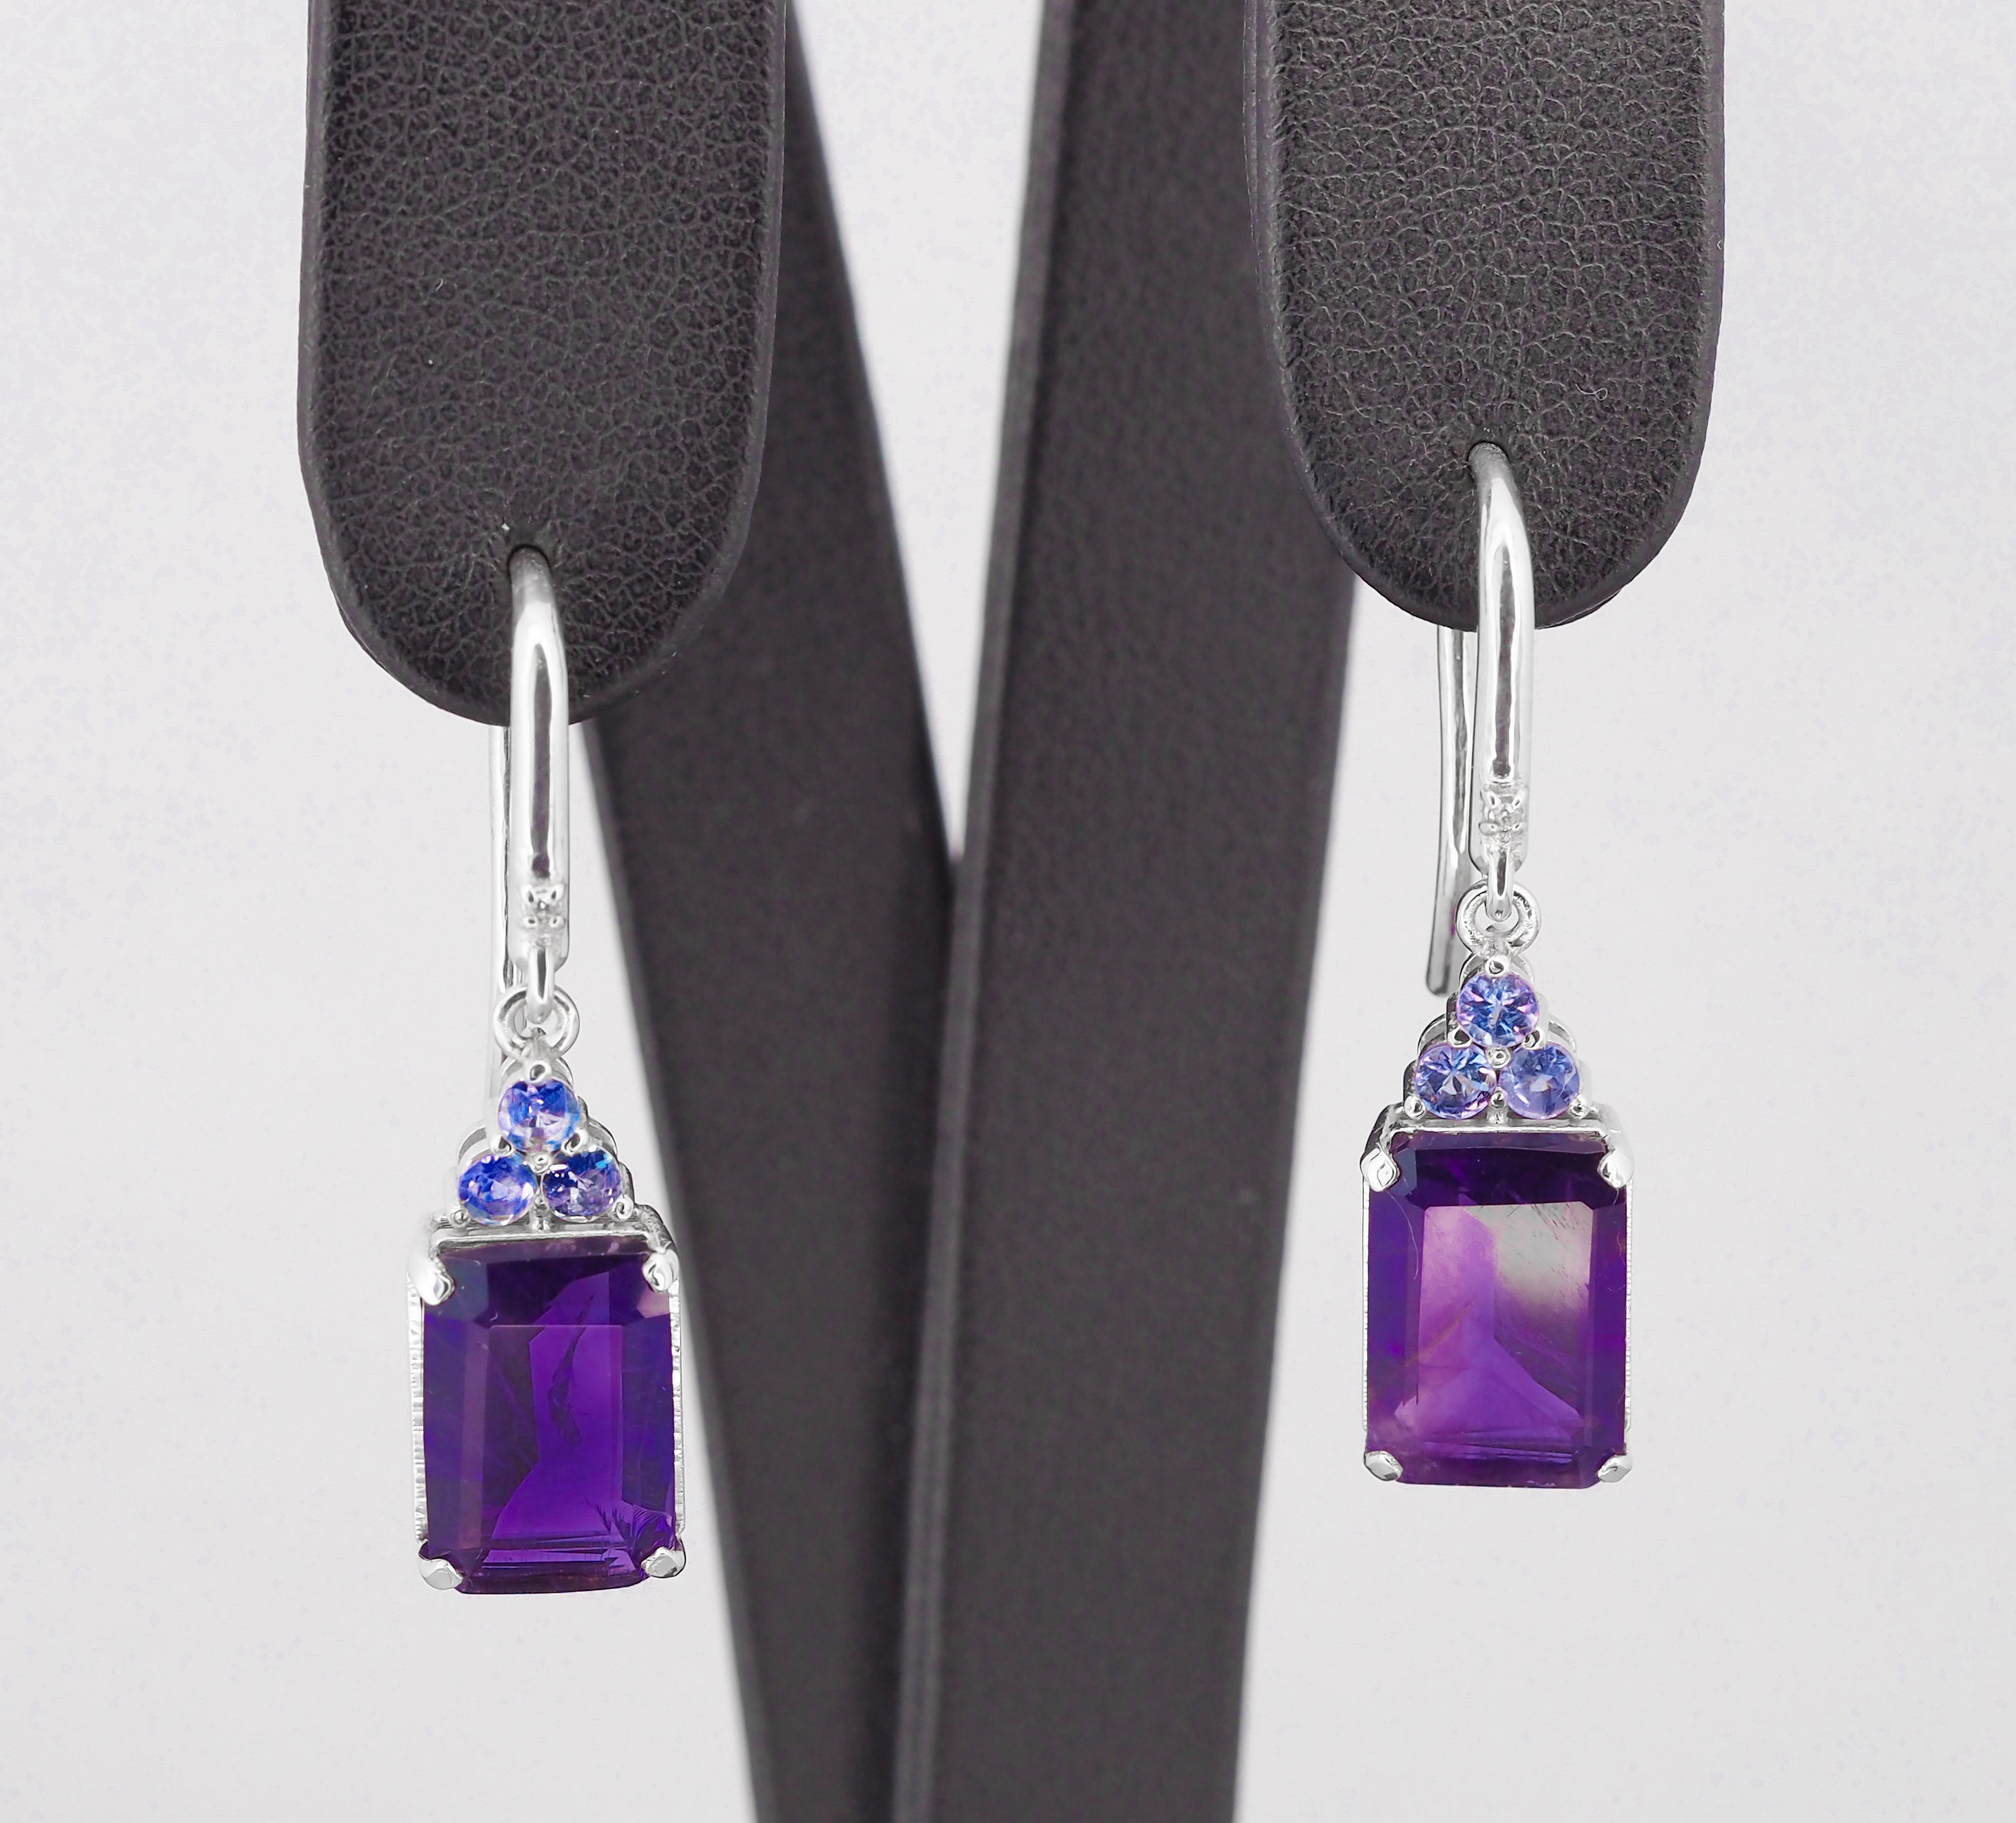 14 Kt White Gold Earrings with Amethysts, Tanzanites and Diamonds!